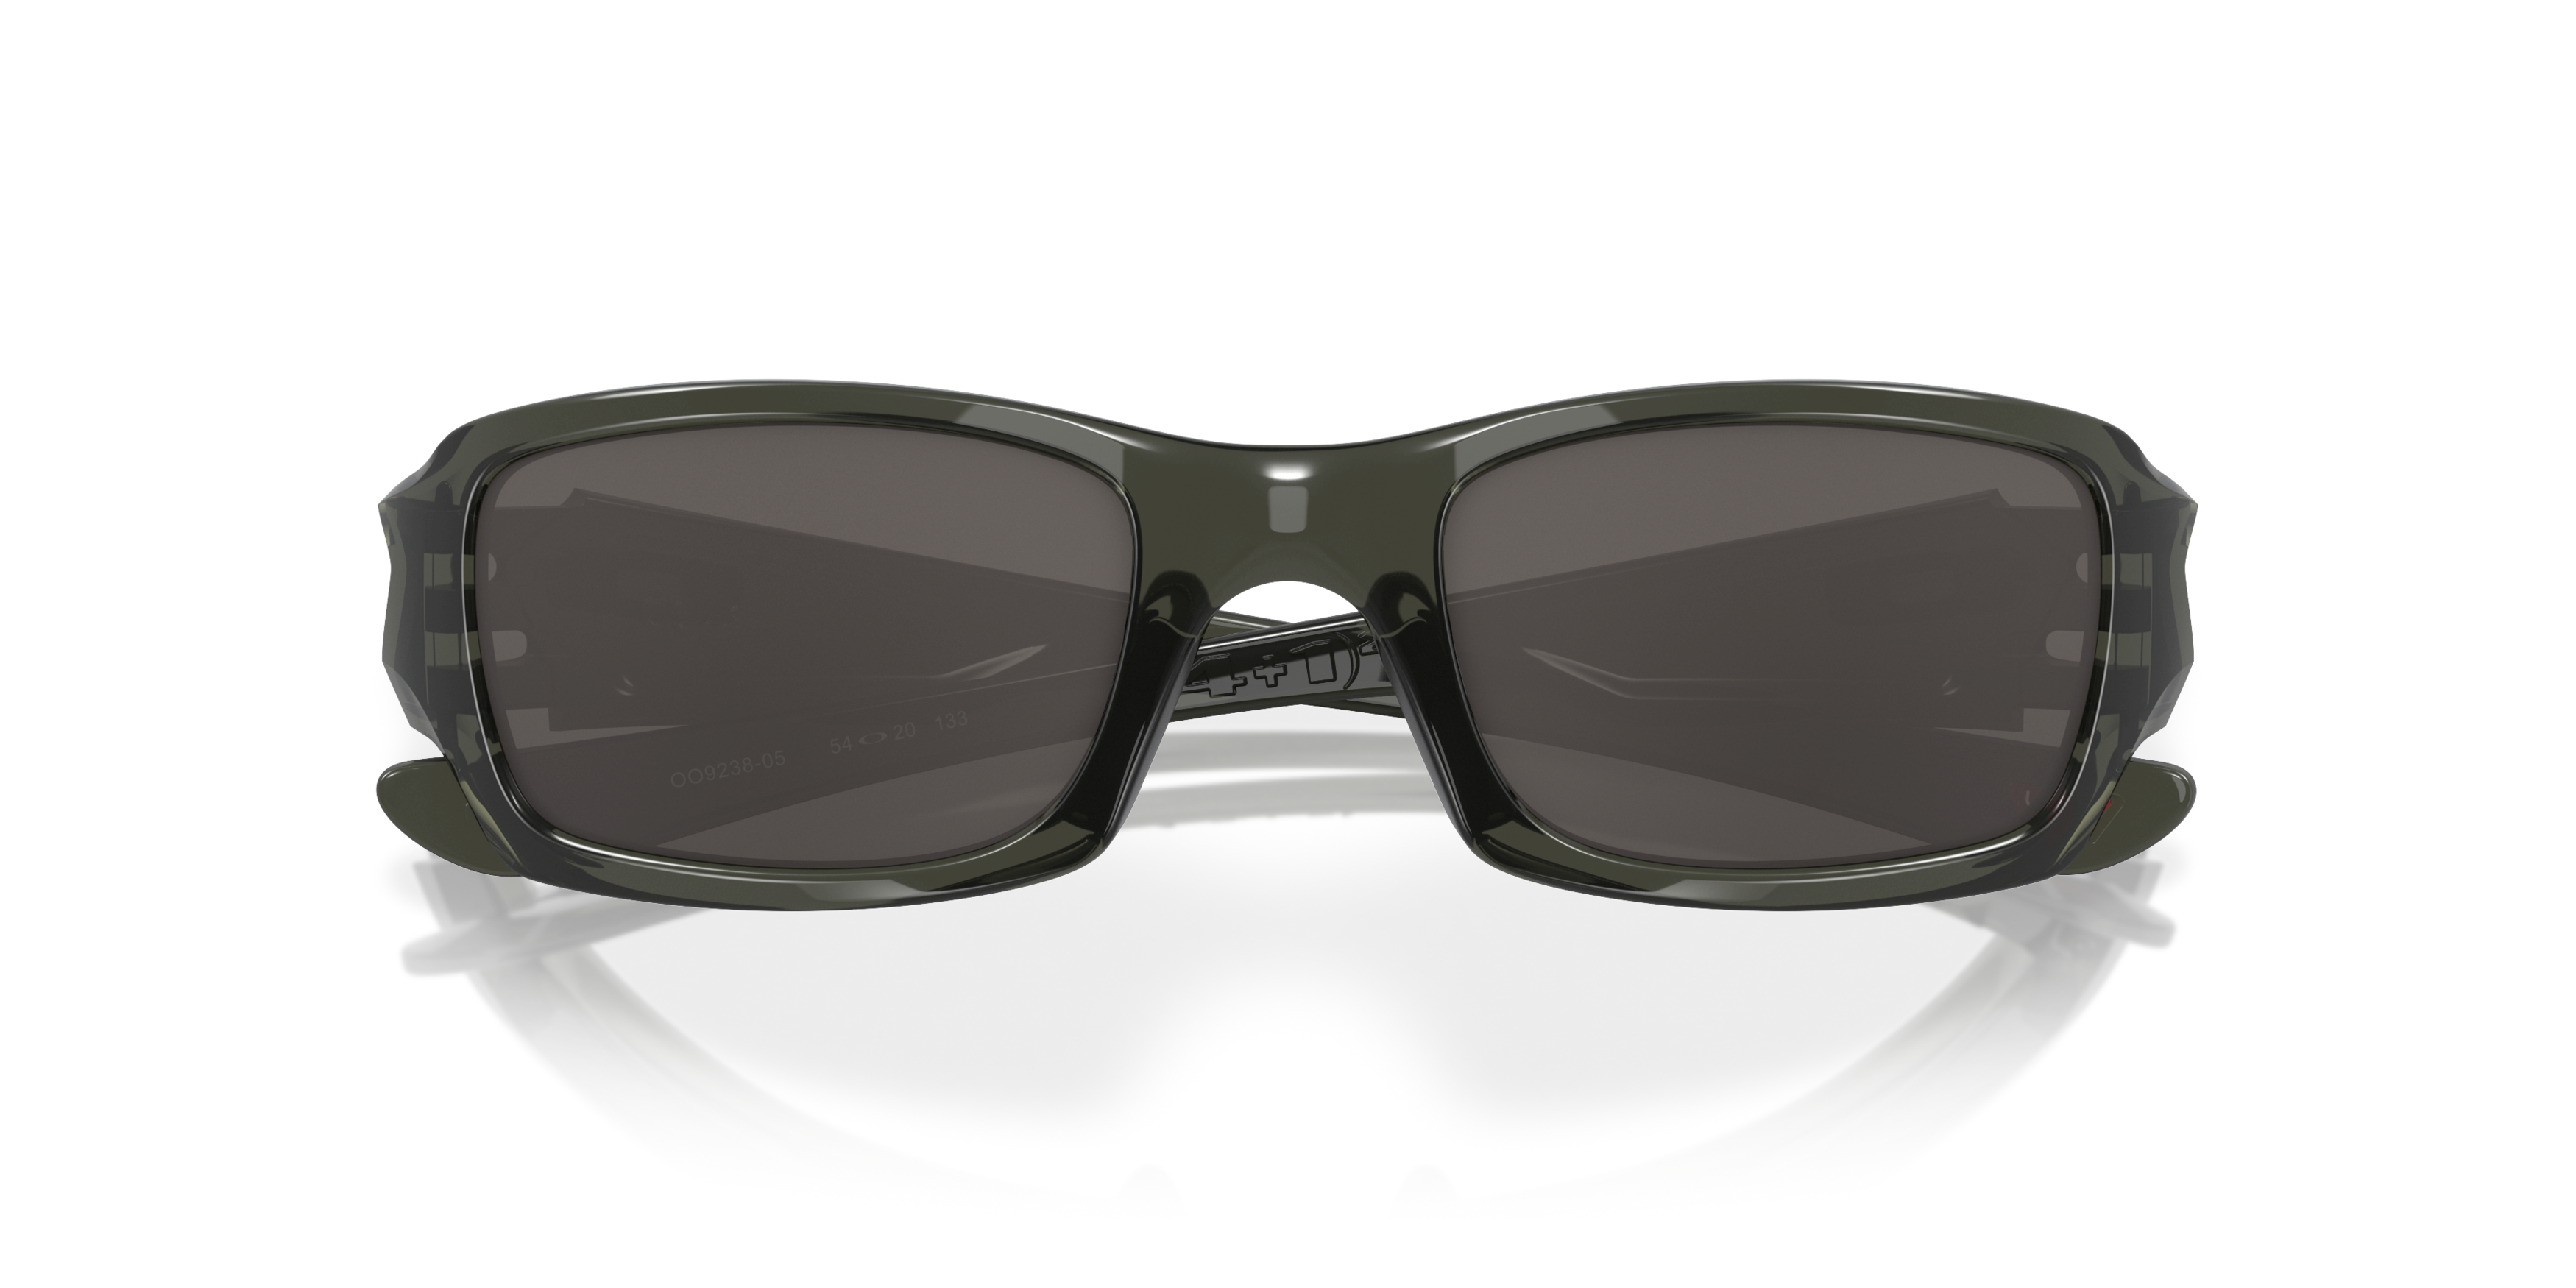 [products.image.folded] OAKLEY FIVES SQUARED OO9238 923805